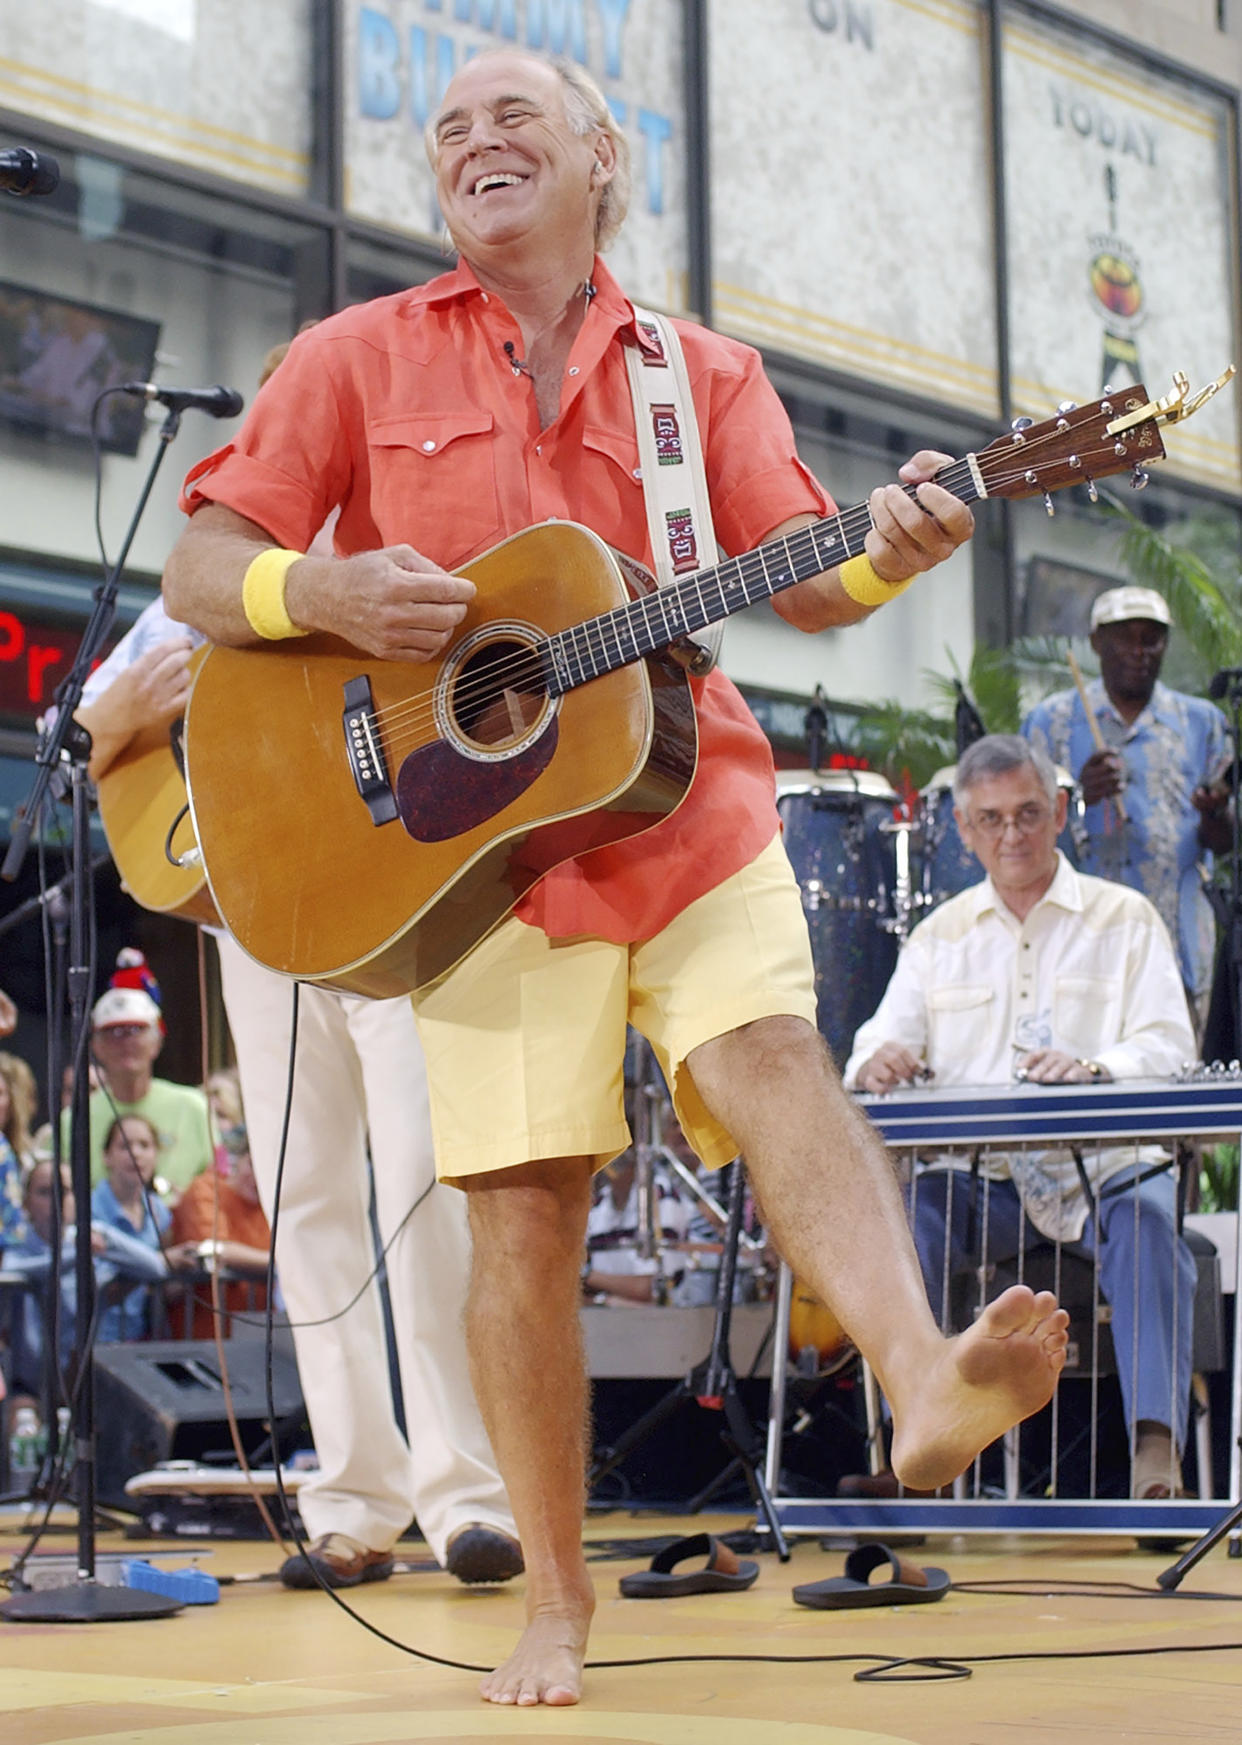 FILE - Singer Jimmy Buffet performs barefooted with his band The Coral Reefers on the NBC "Today" television show summer concert series in New York's Rockefeller Plaza, on June 25, 2004. “Margaritaville” singer-songwriter Jimmy Buffett has died at age 76. A statement on Buffett's official website and social media pages says the singer died Friday, Sept. 1, 2023 “surrounded by his family, friends, music and dogs”. (AP Photo/Richard Drew, File)